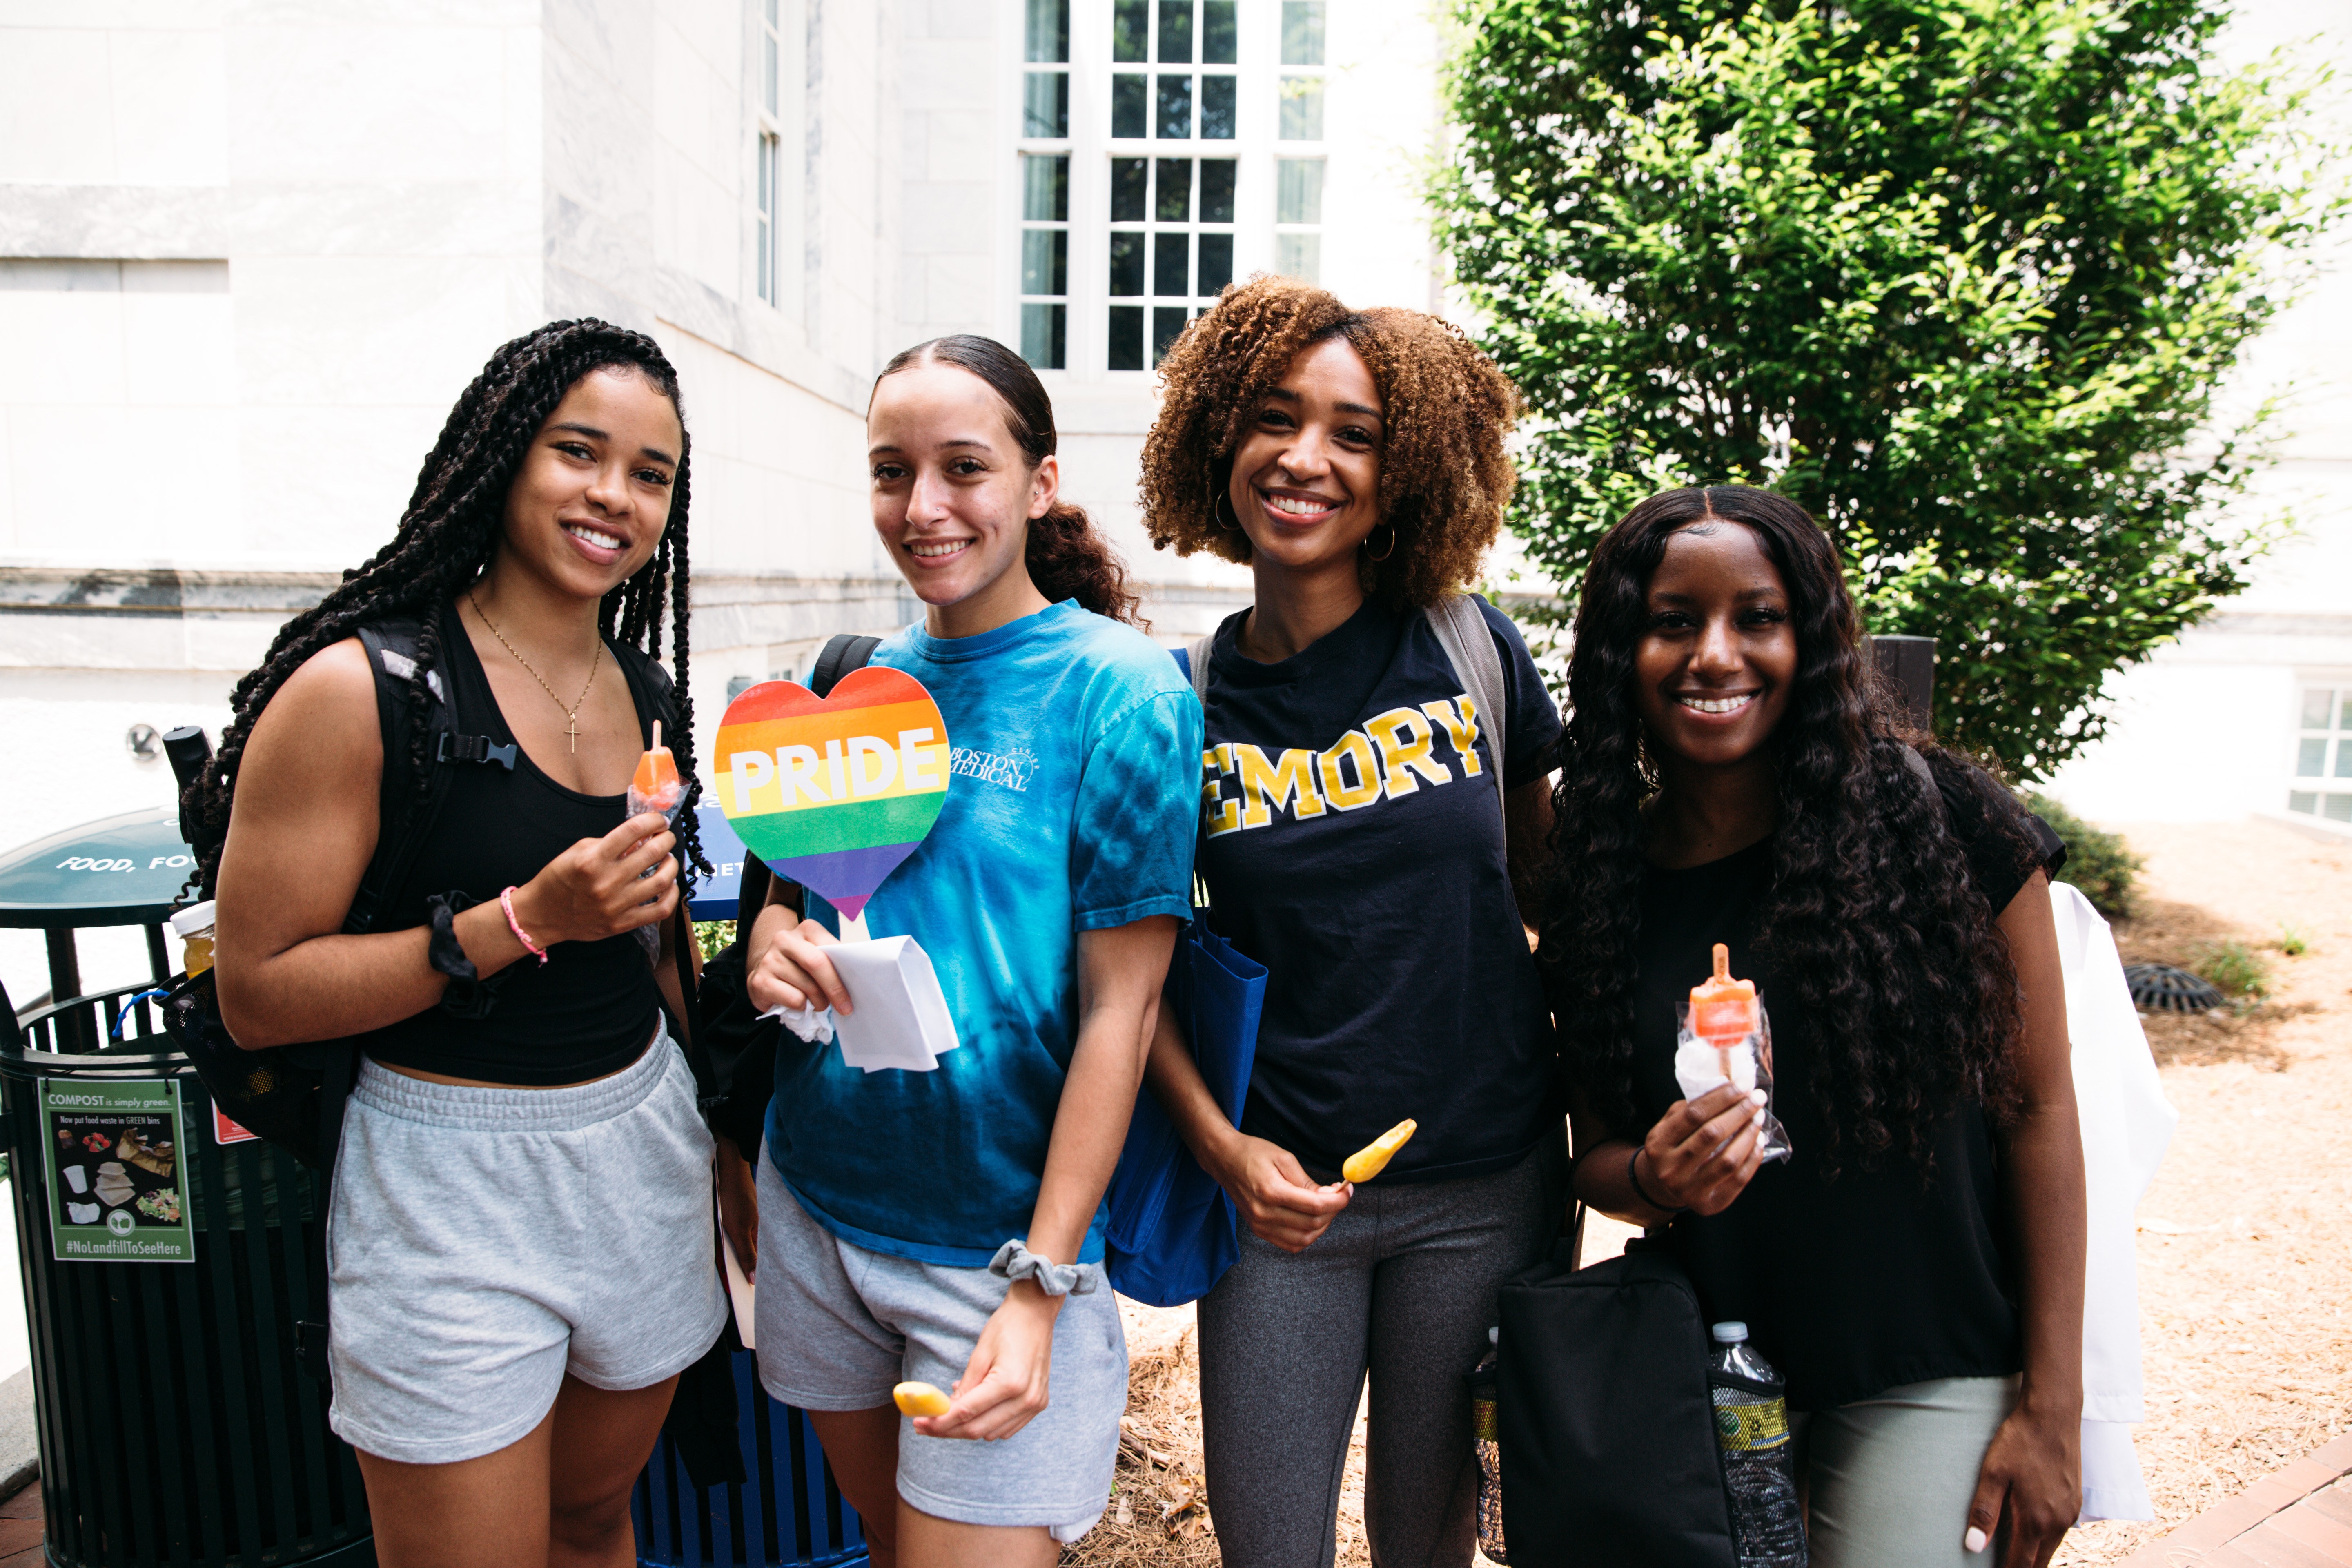 Four women stand in a row eating popsicles and smiling